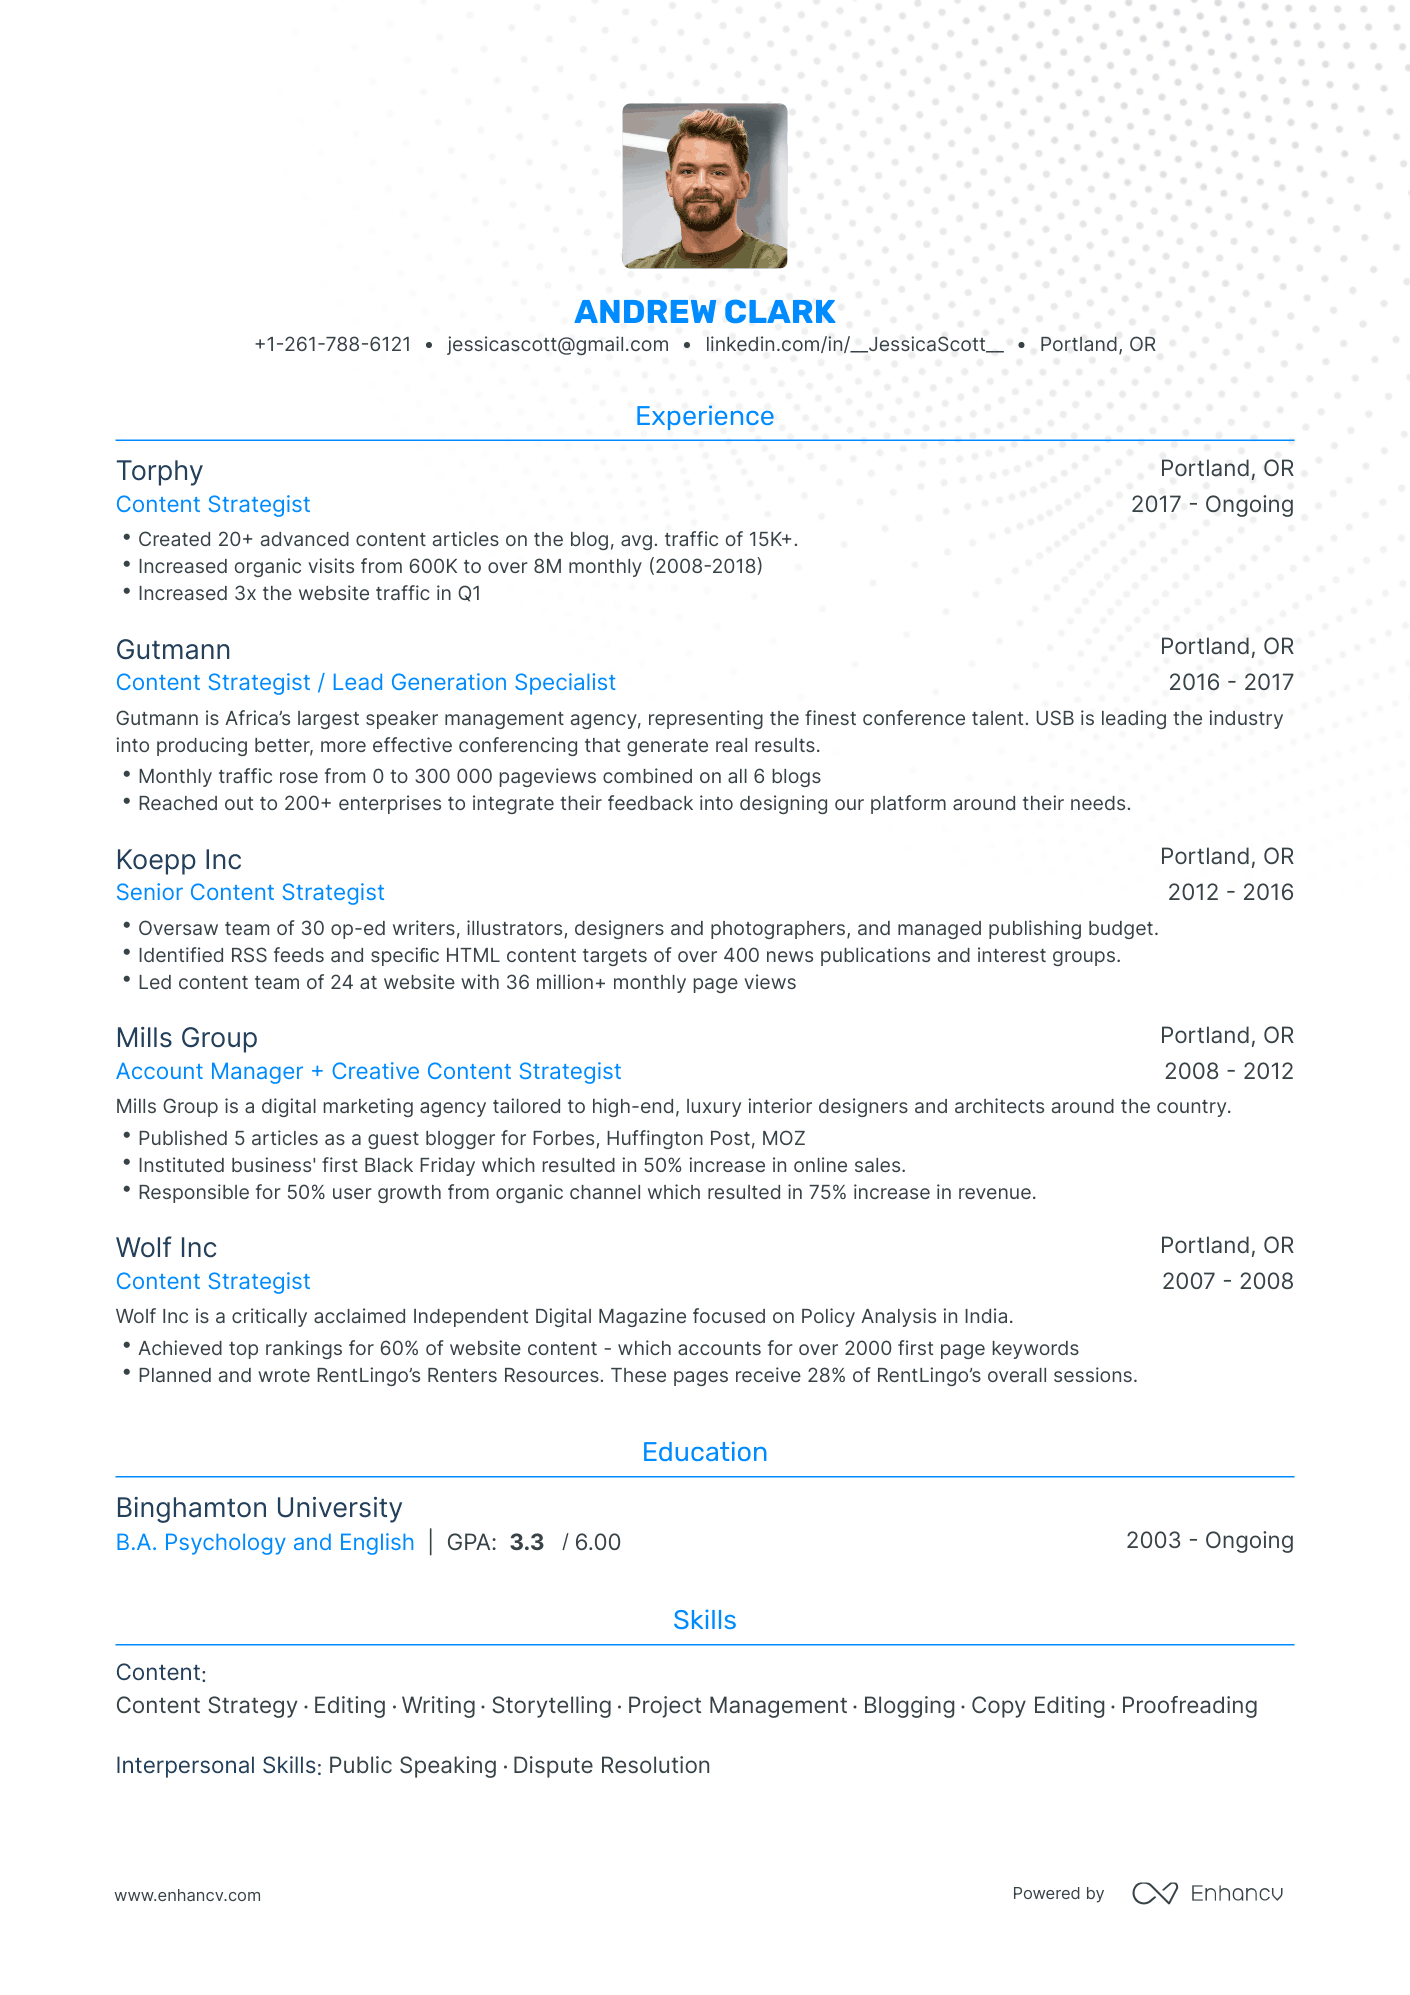 Traditional Content Strategist Resume Template